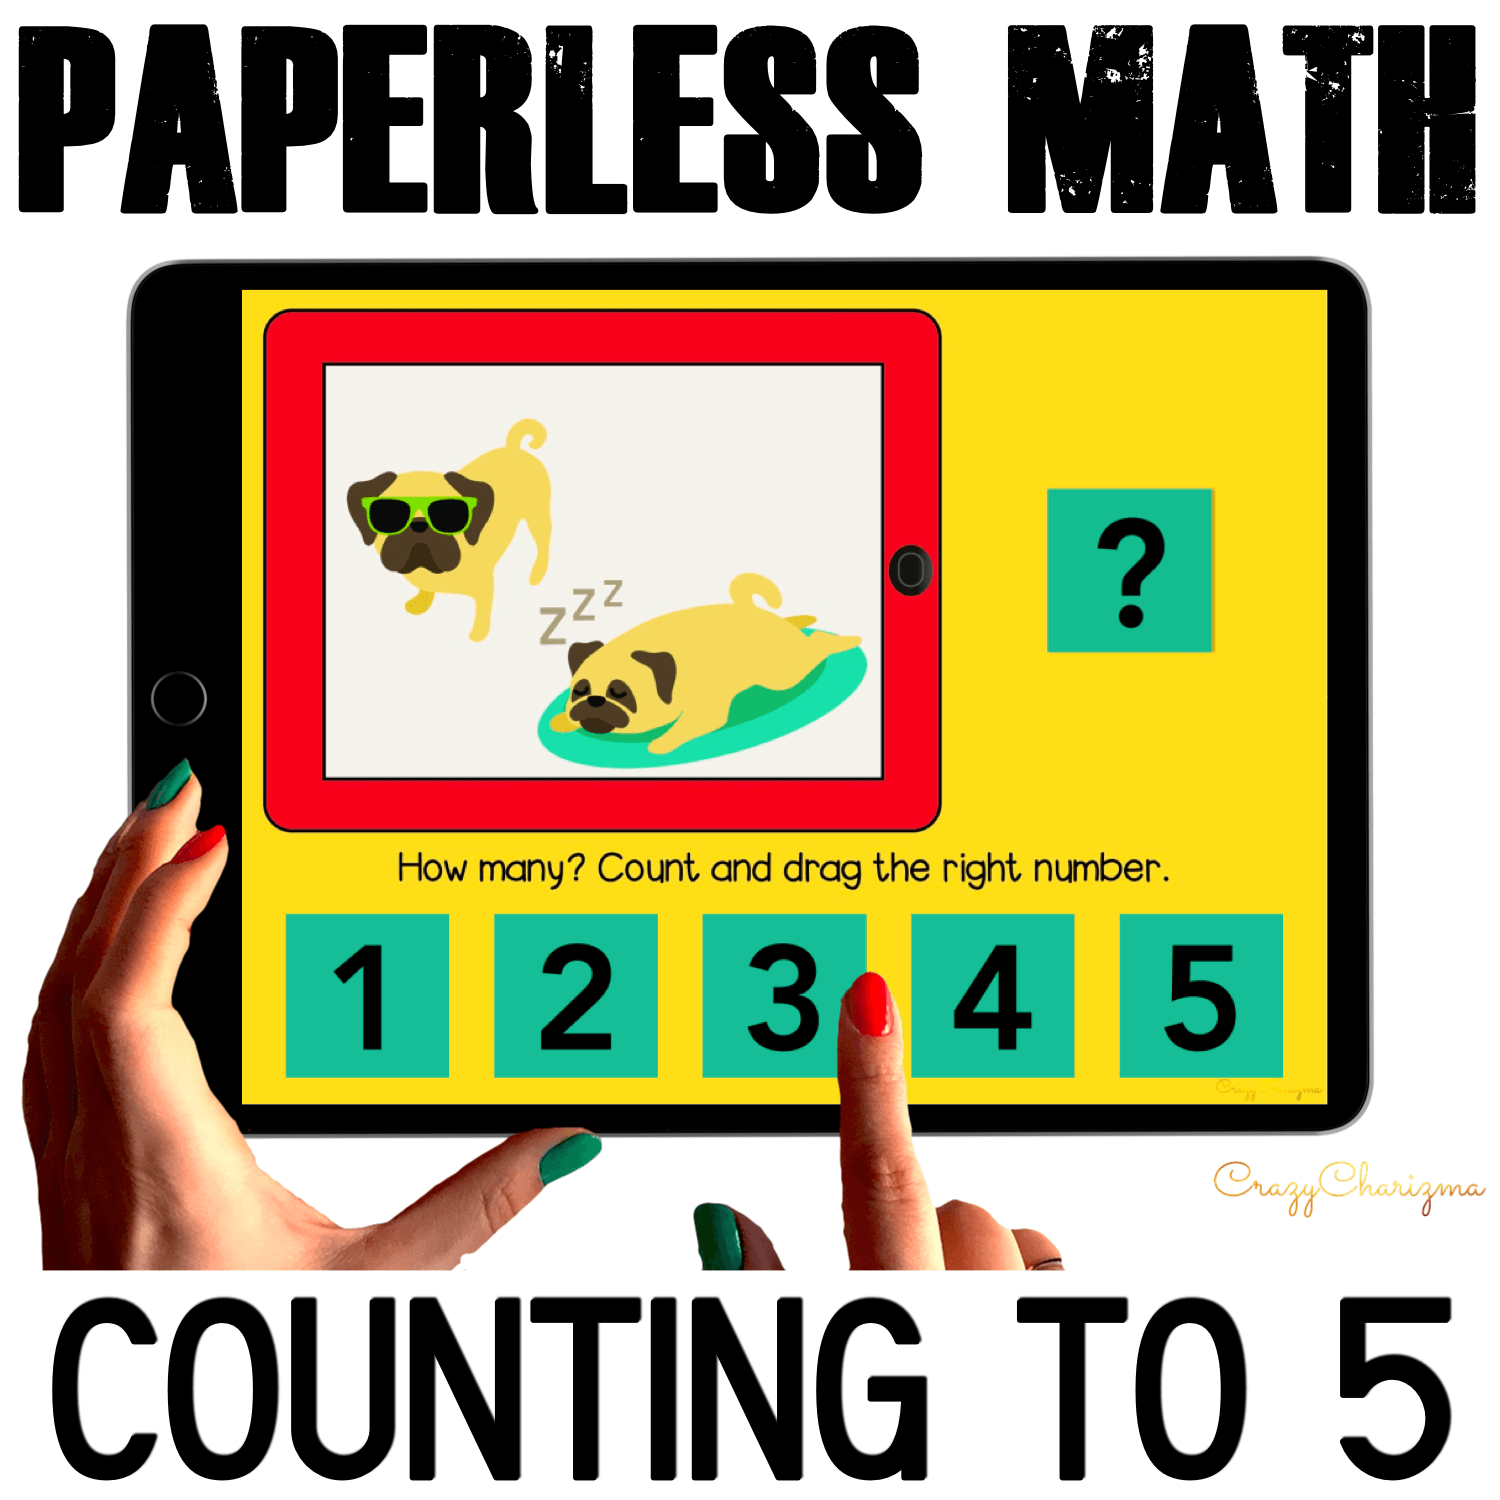 Counting objects to 5 Activities for Kindergarten Google Classroom